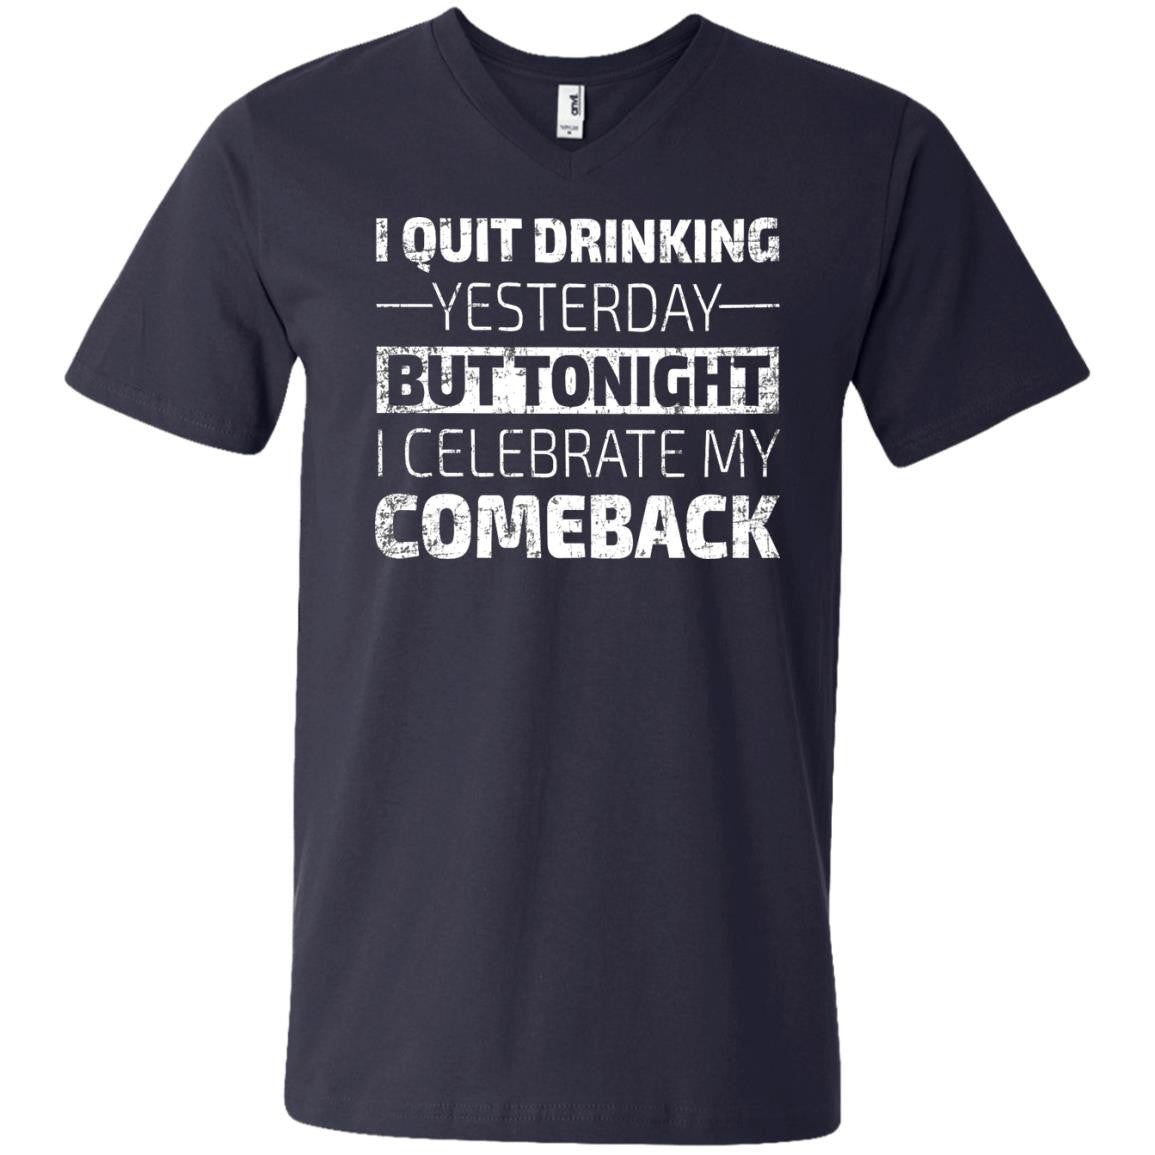 I Quit Drinking Yesterday But Tonight I Celebrate My Comeback T-Shirt Apparel - The Beer Lodge